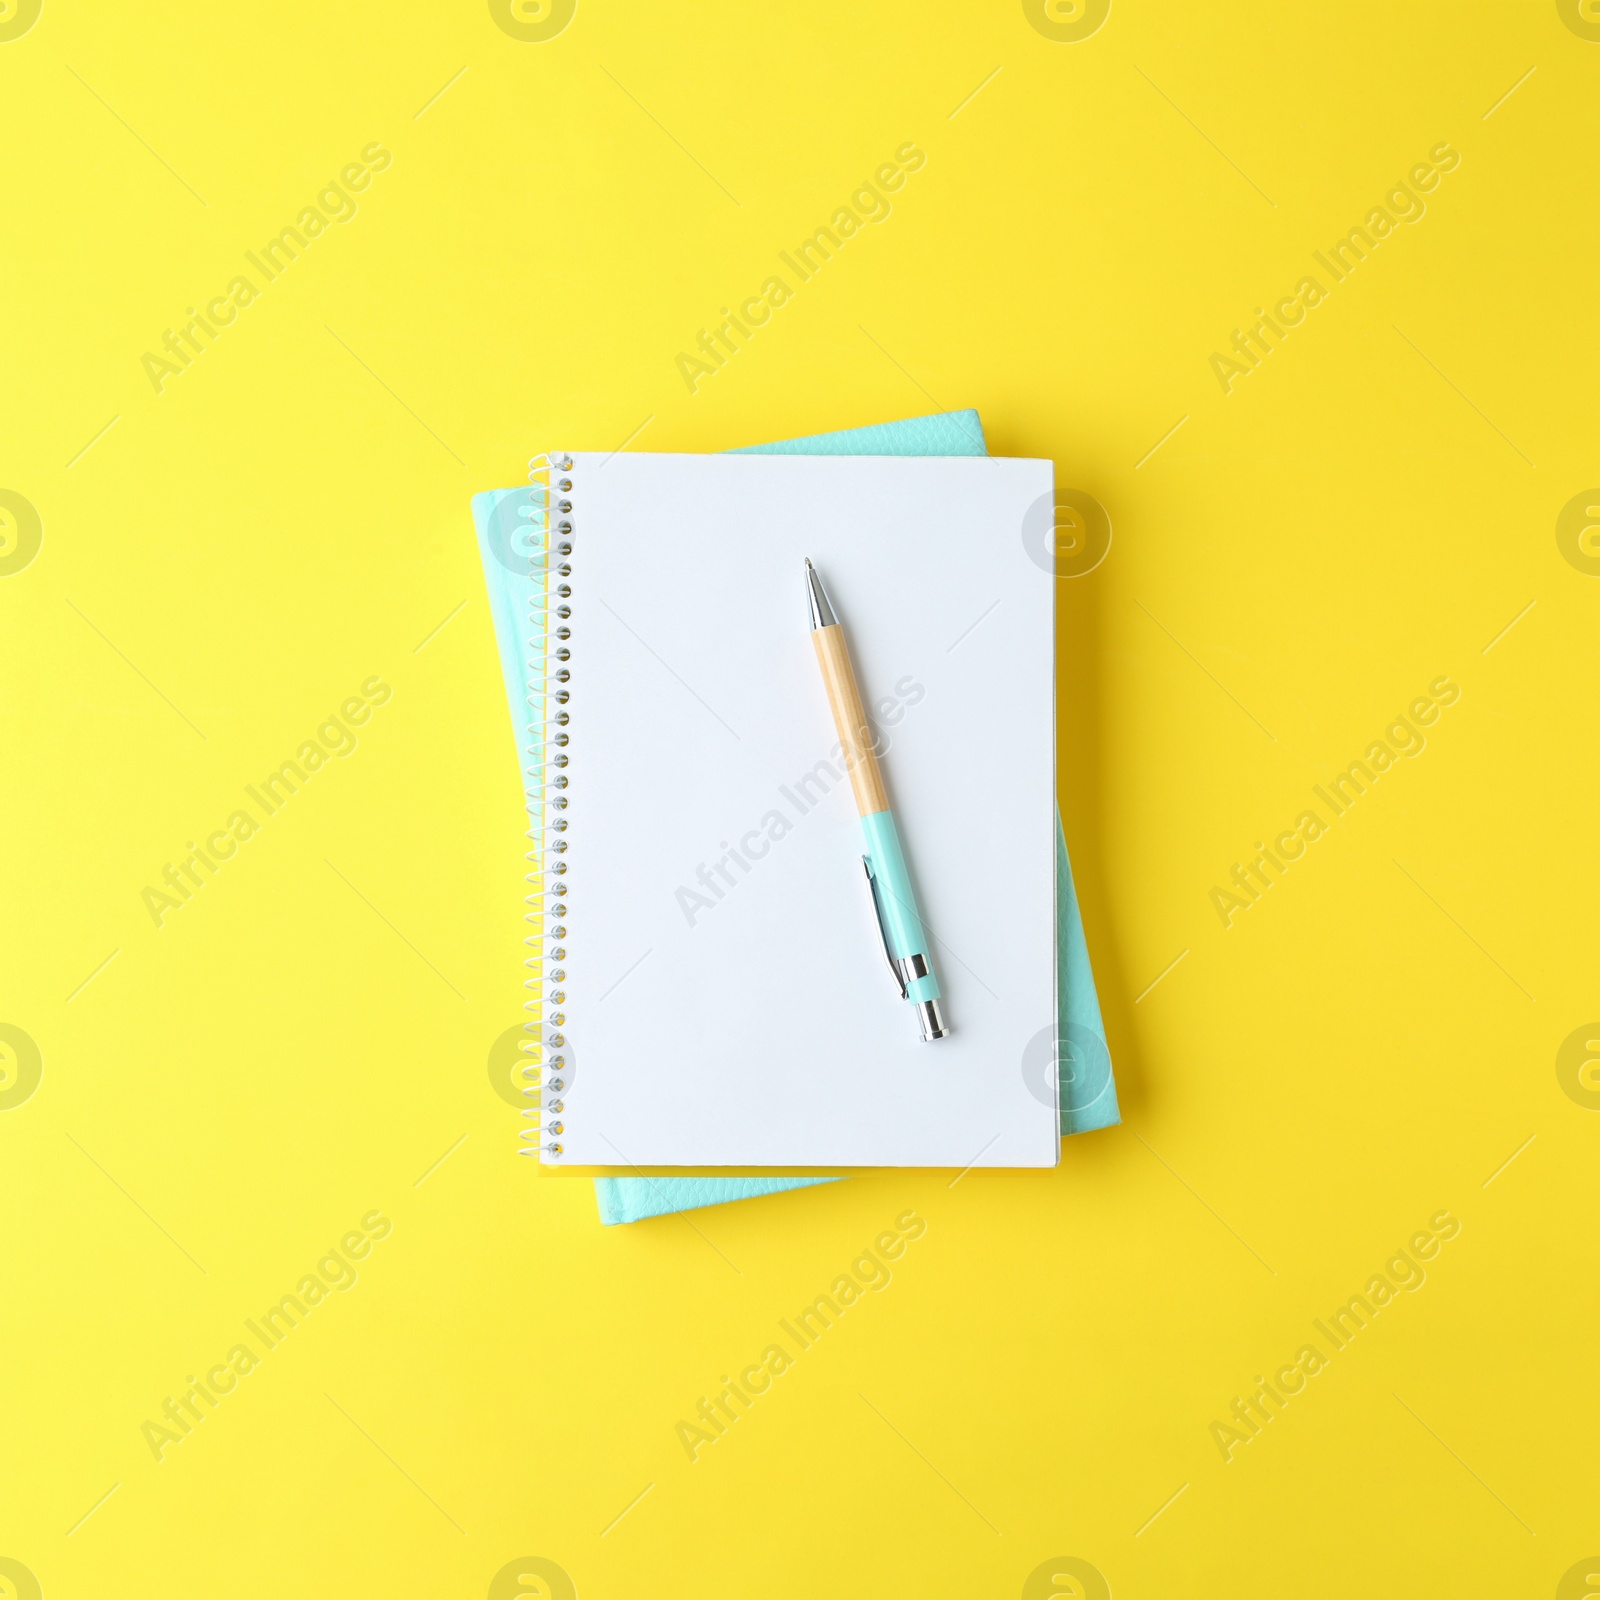 Image of Notebooks and pen on yellow background, top view